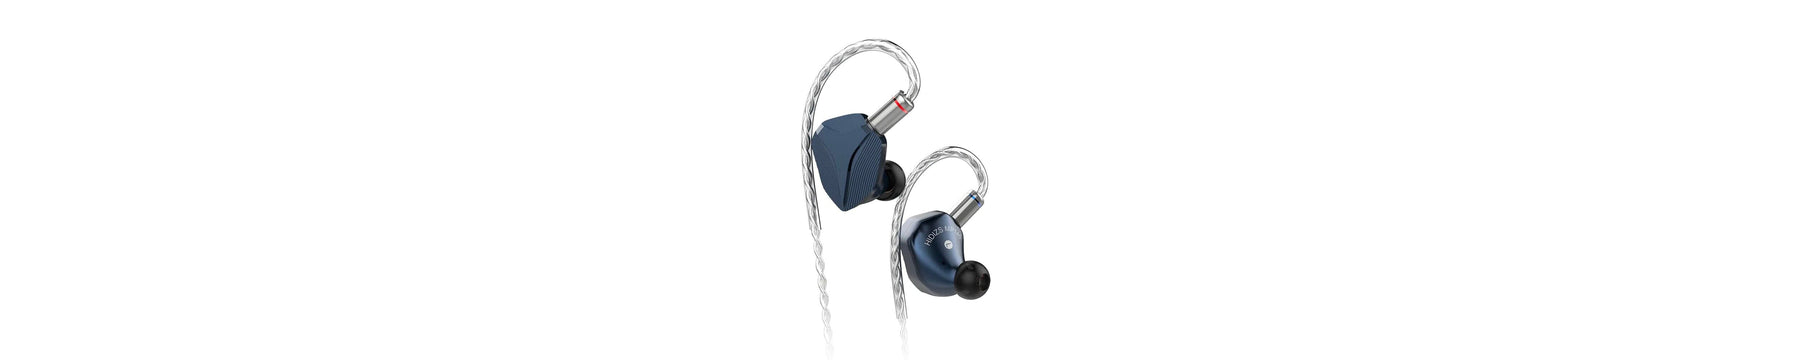 Hidizs MP145: Brand-New Large 14.5mm Planar Magnetic Driver IEMs